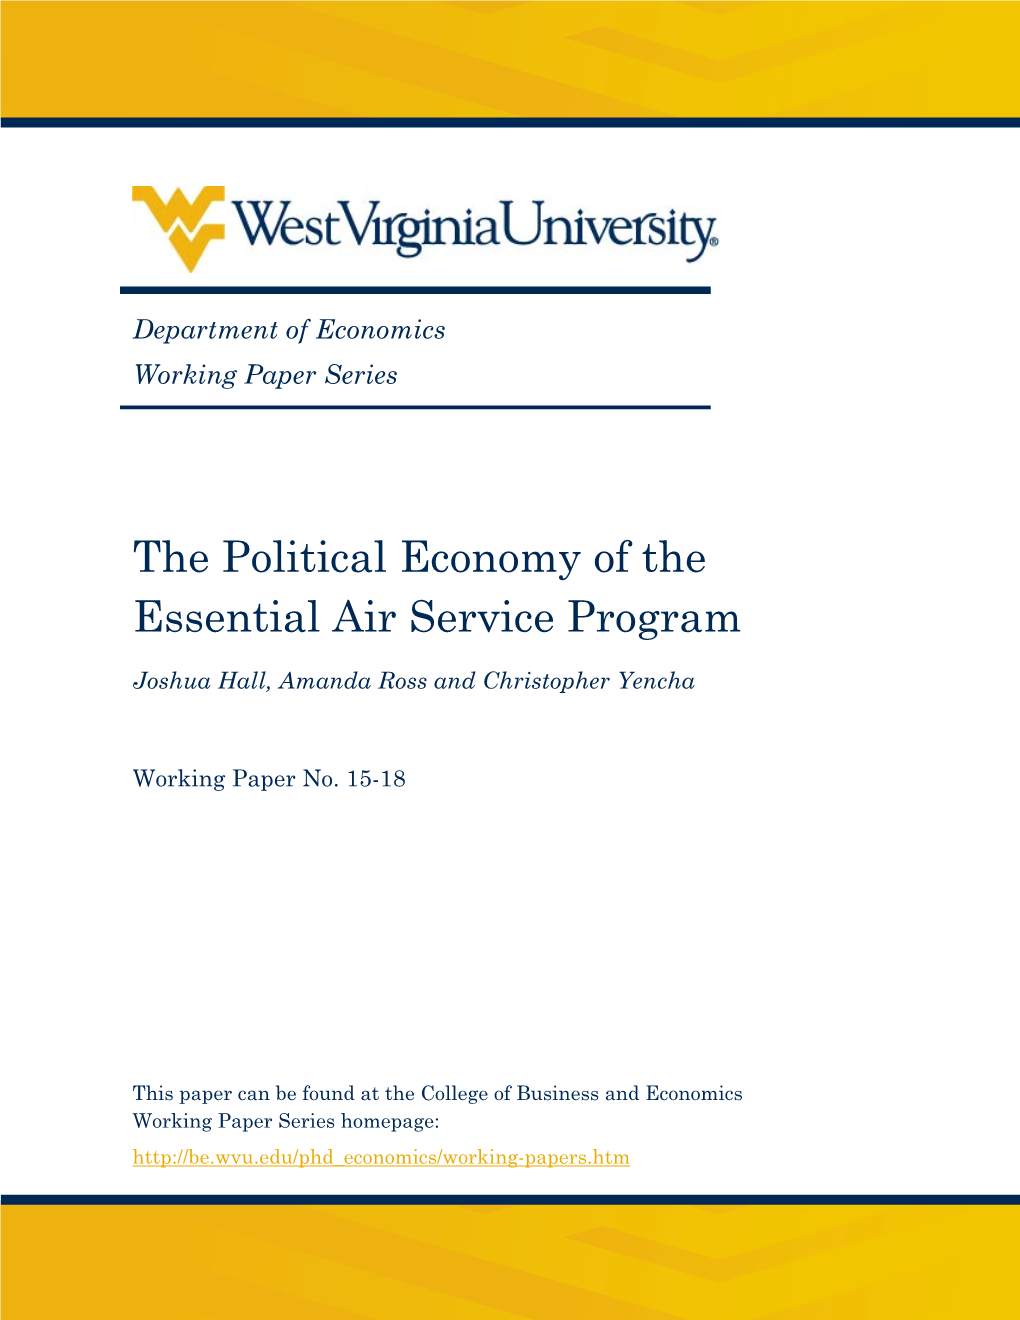 The Political Economy of the Essential Air Service Program